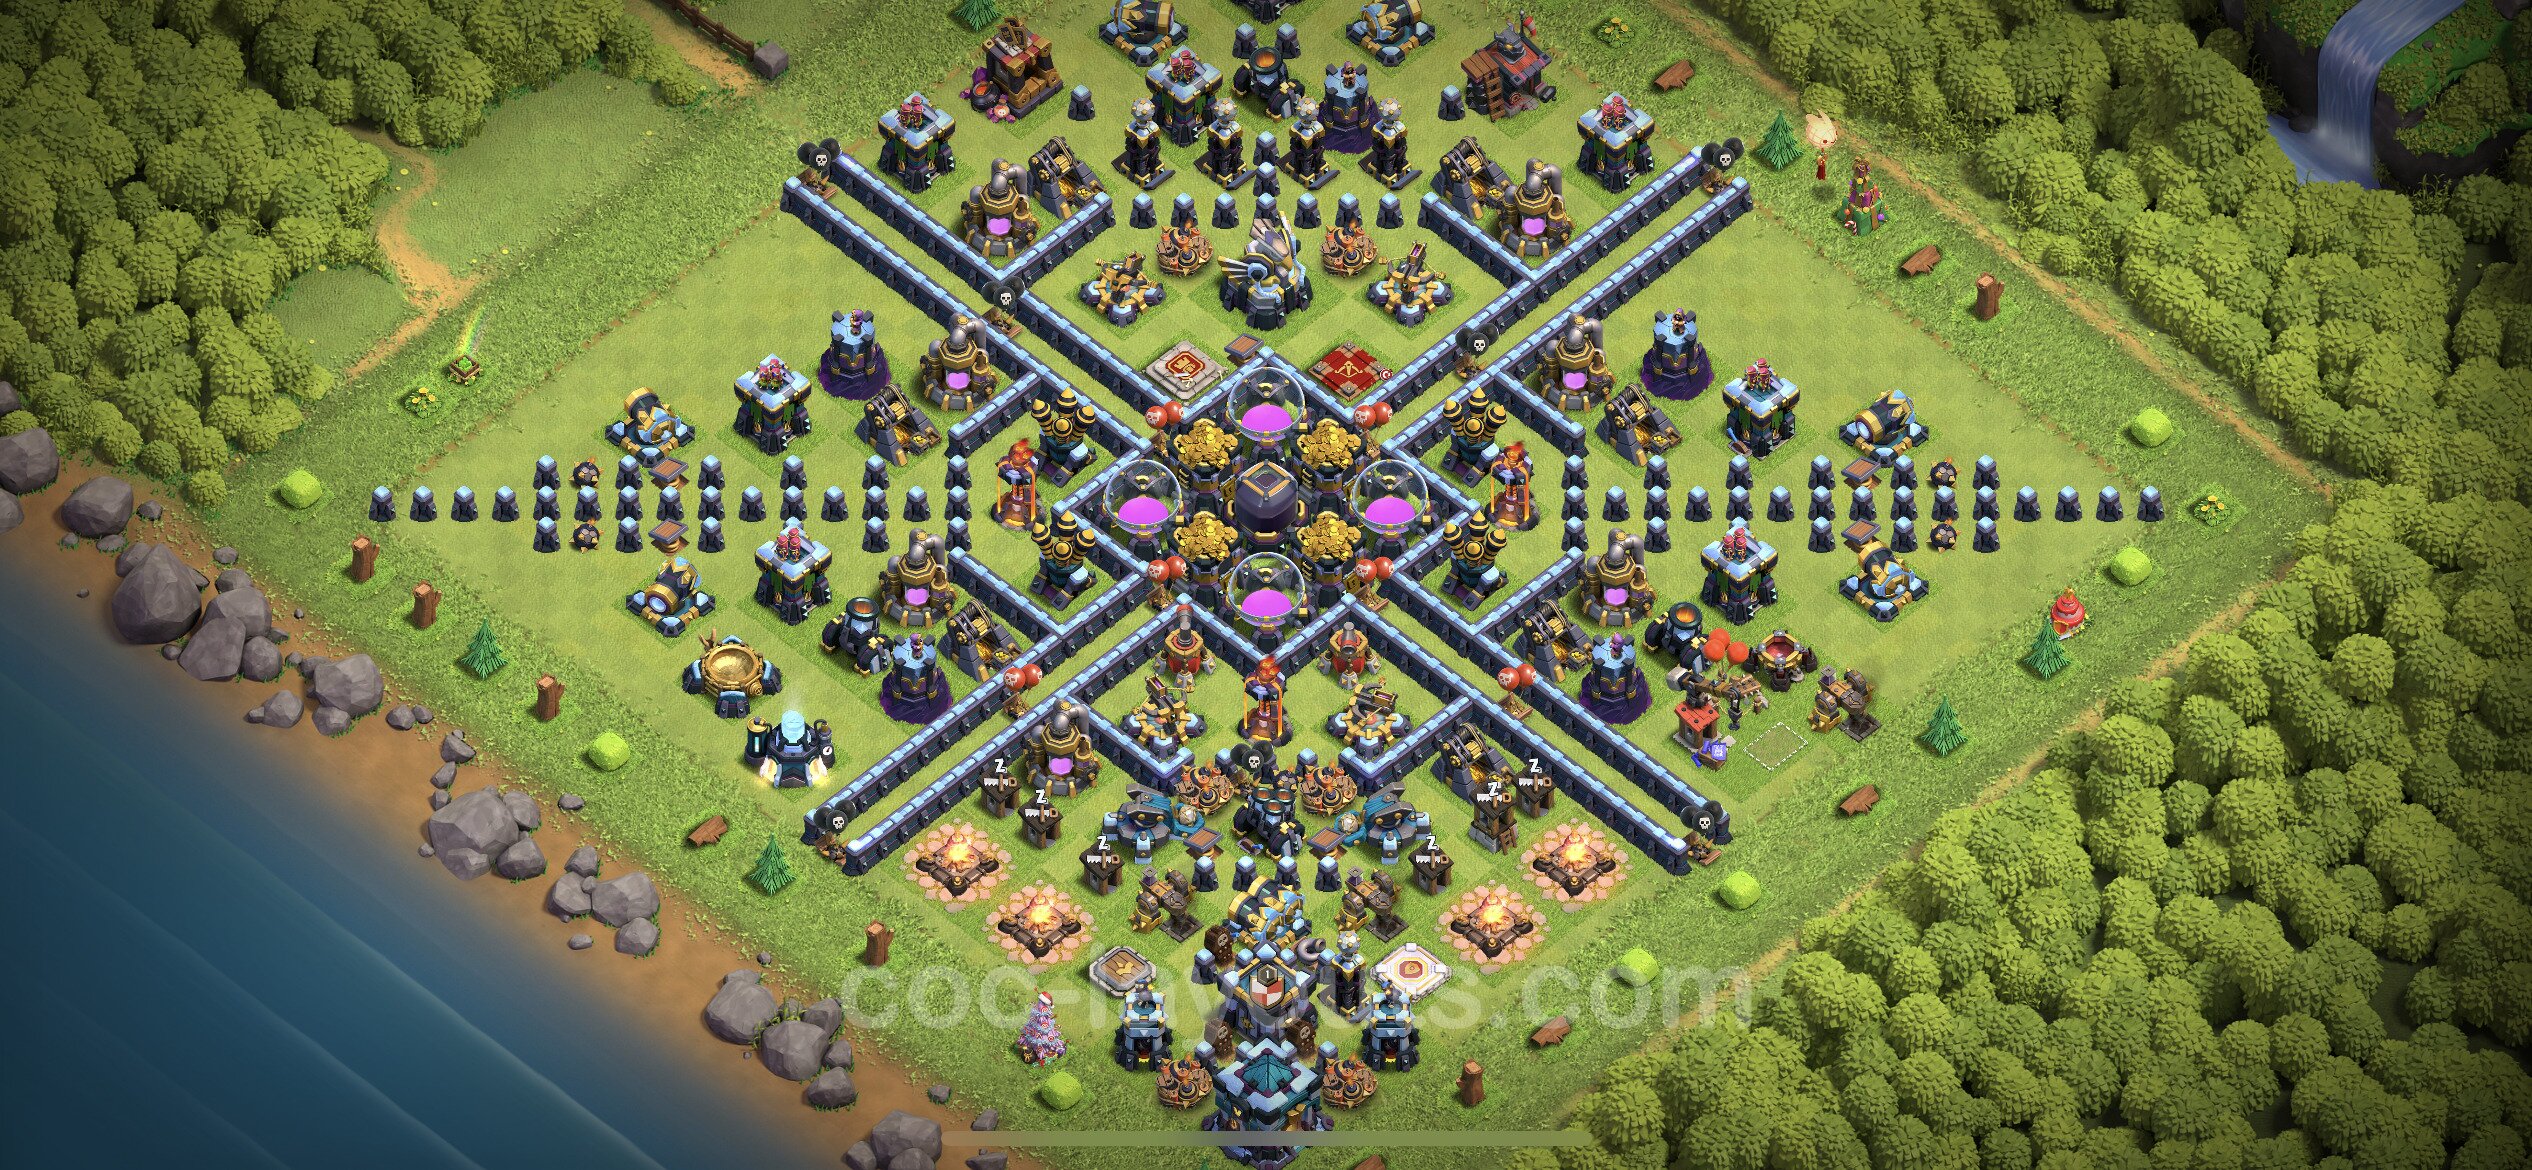 Farming Base TH13 with Link - plan / layout / design - Clash of Clans - (.....